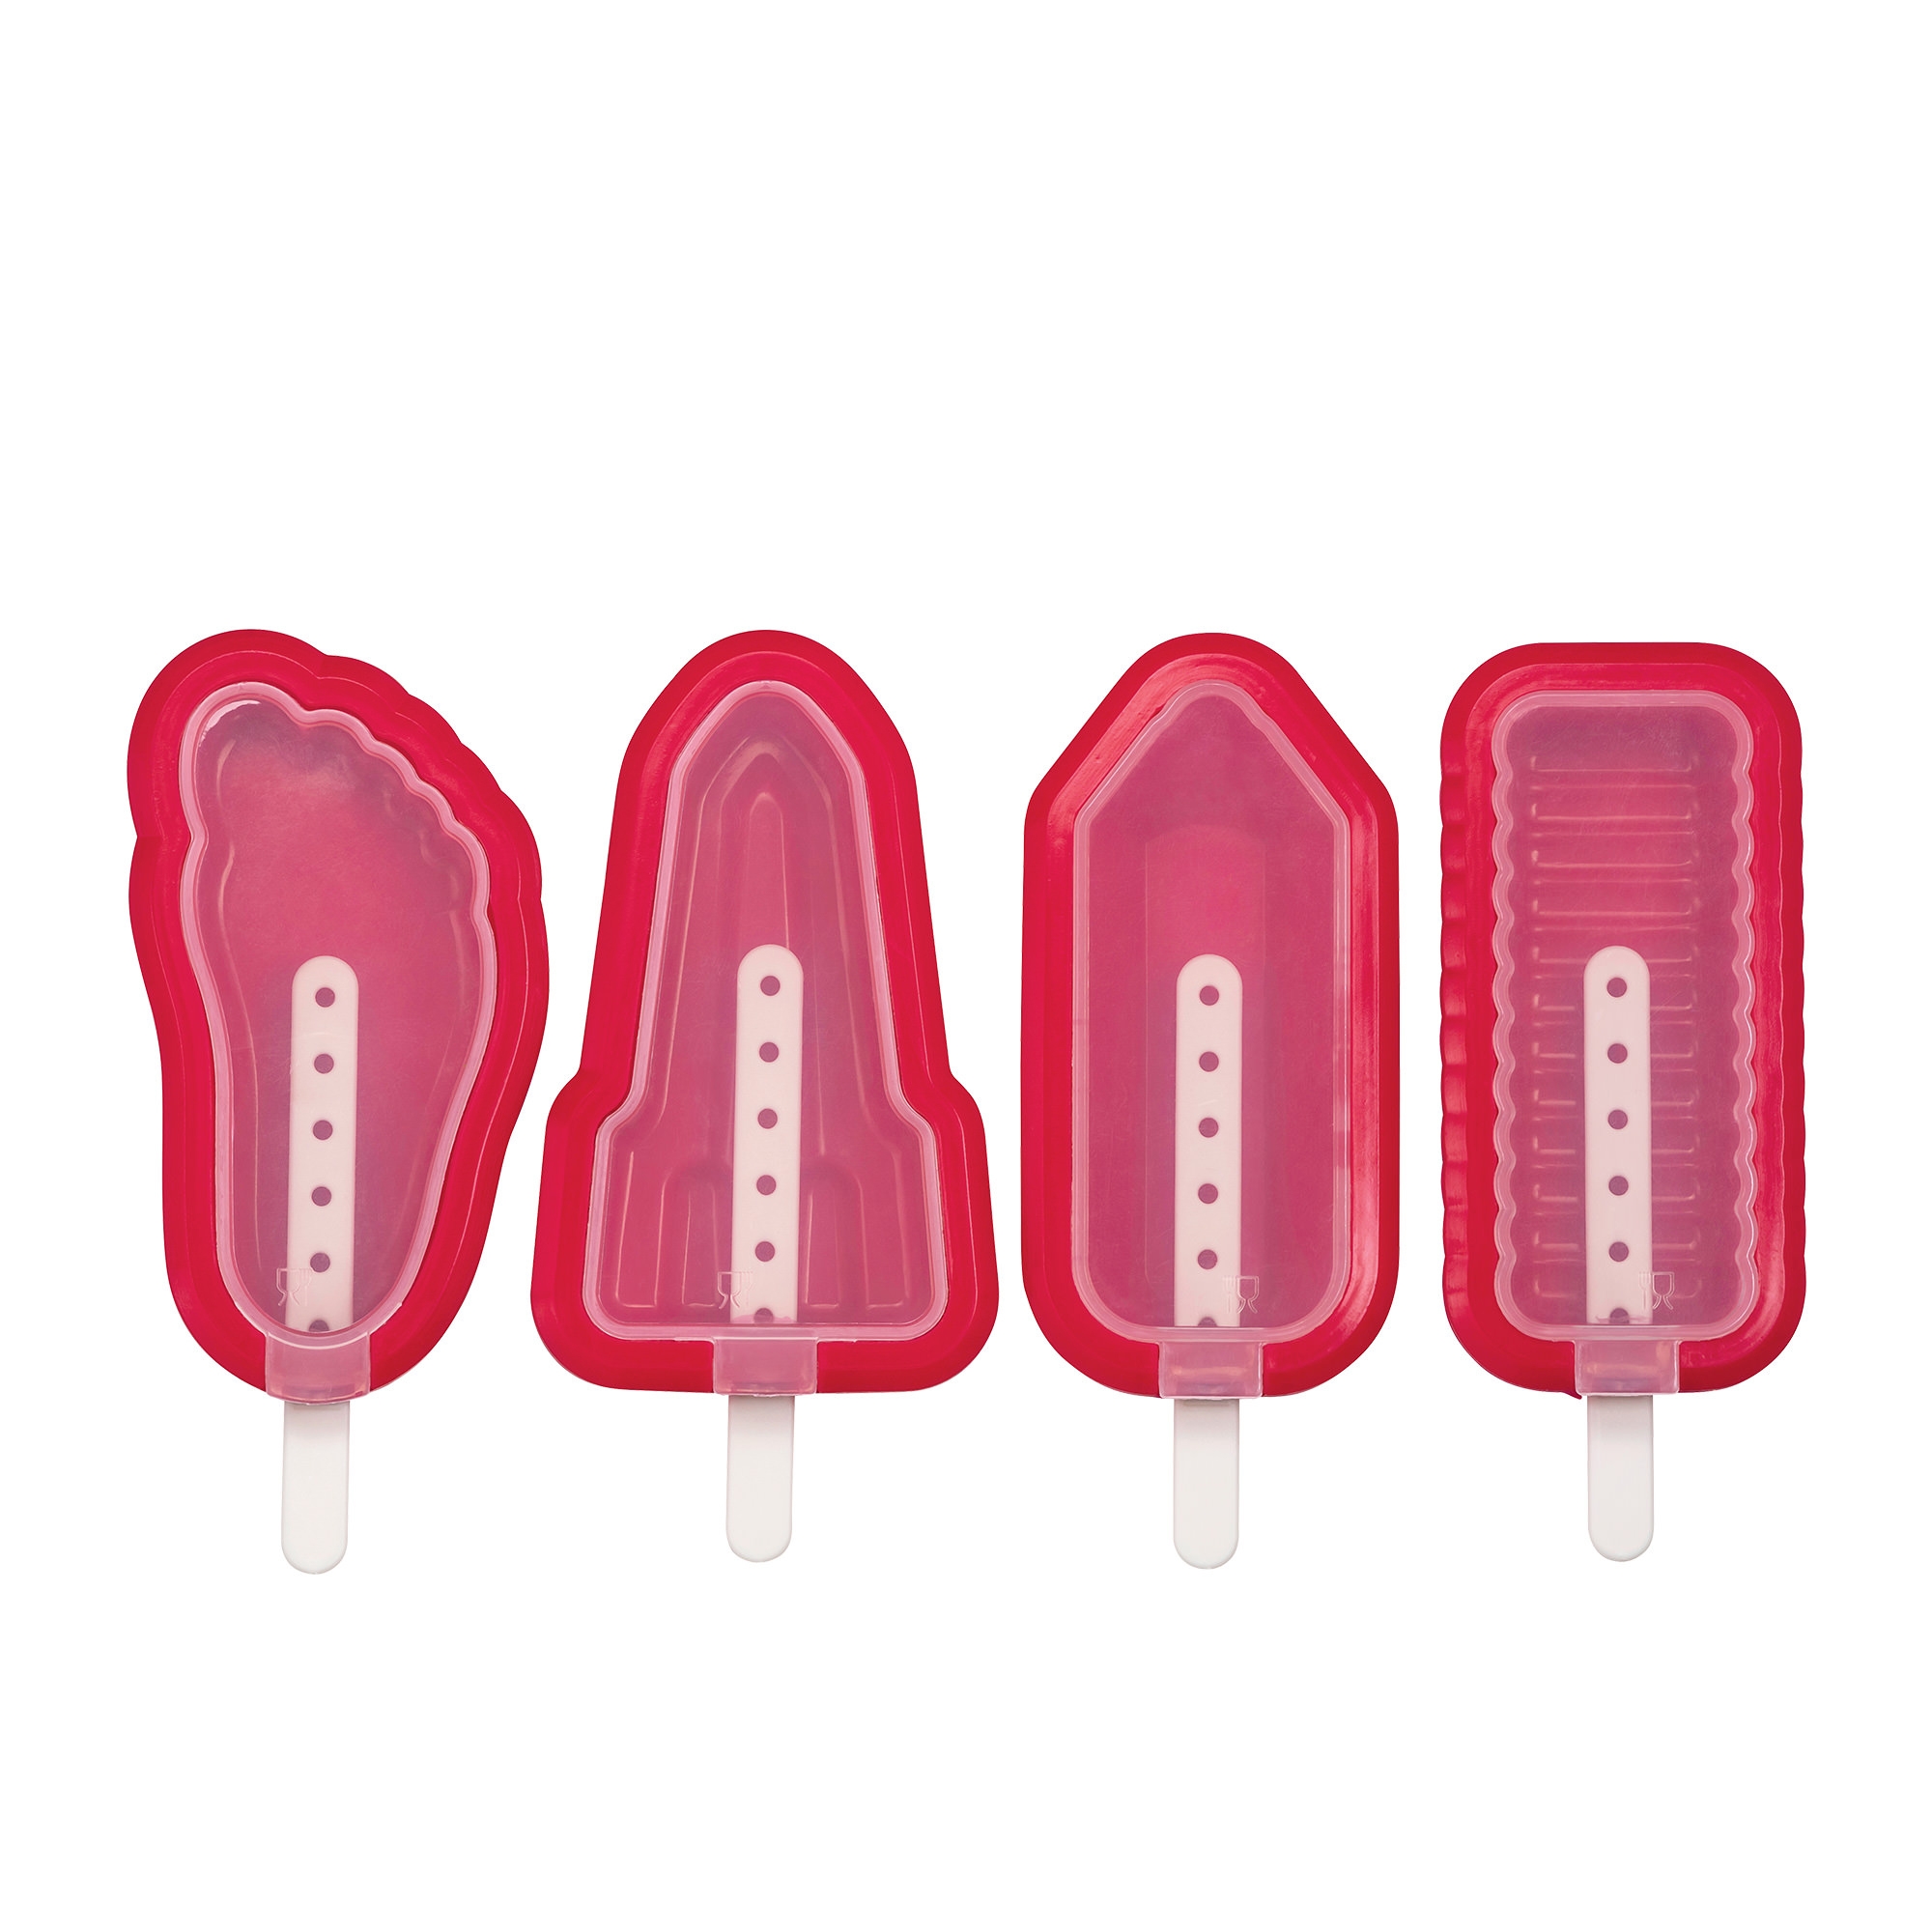 Avanti Stackable Popsicle Moulds Set of 4 Red Image 1